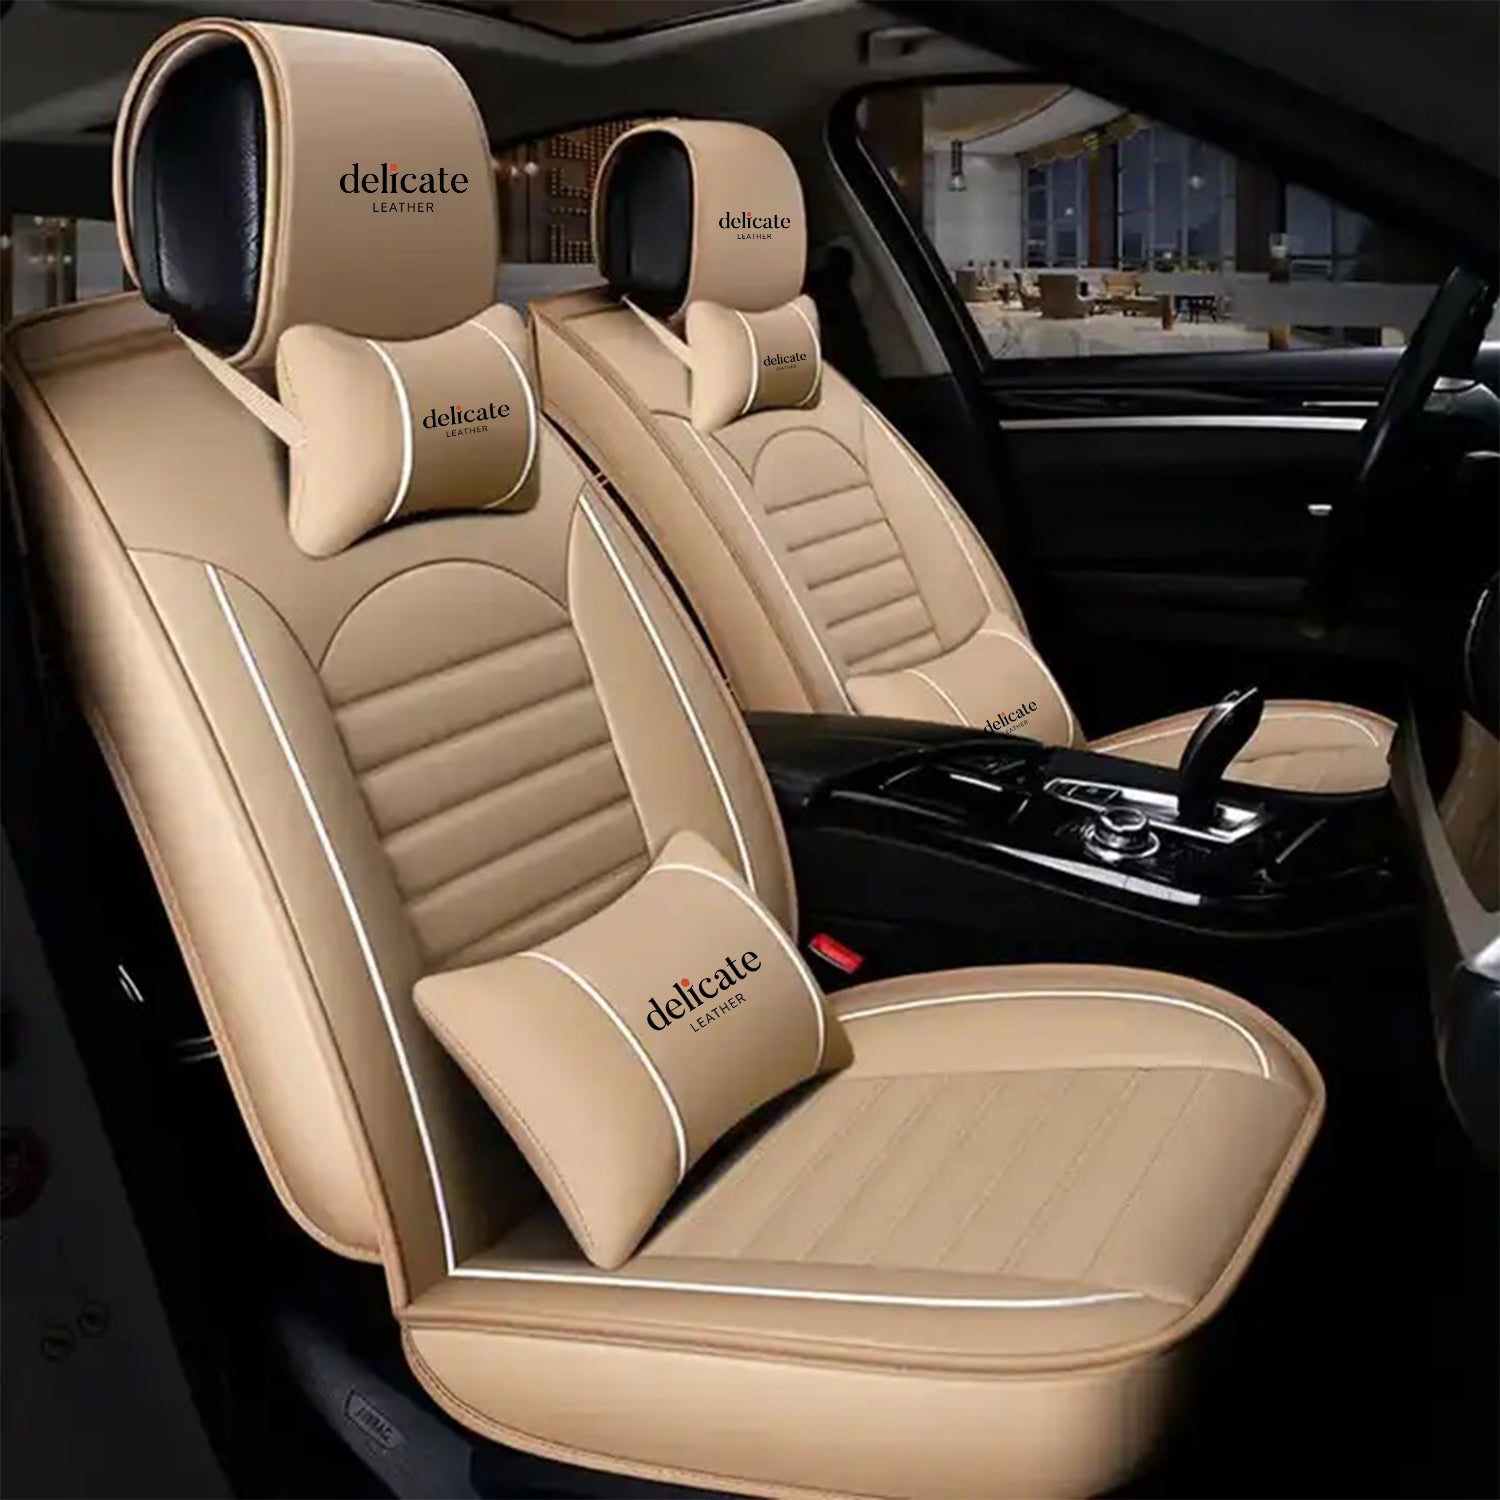 Delicate Leather Car Seat Cover Quality Universal PU leather 5d car seats cover - Delicate Leather